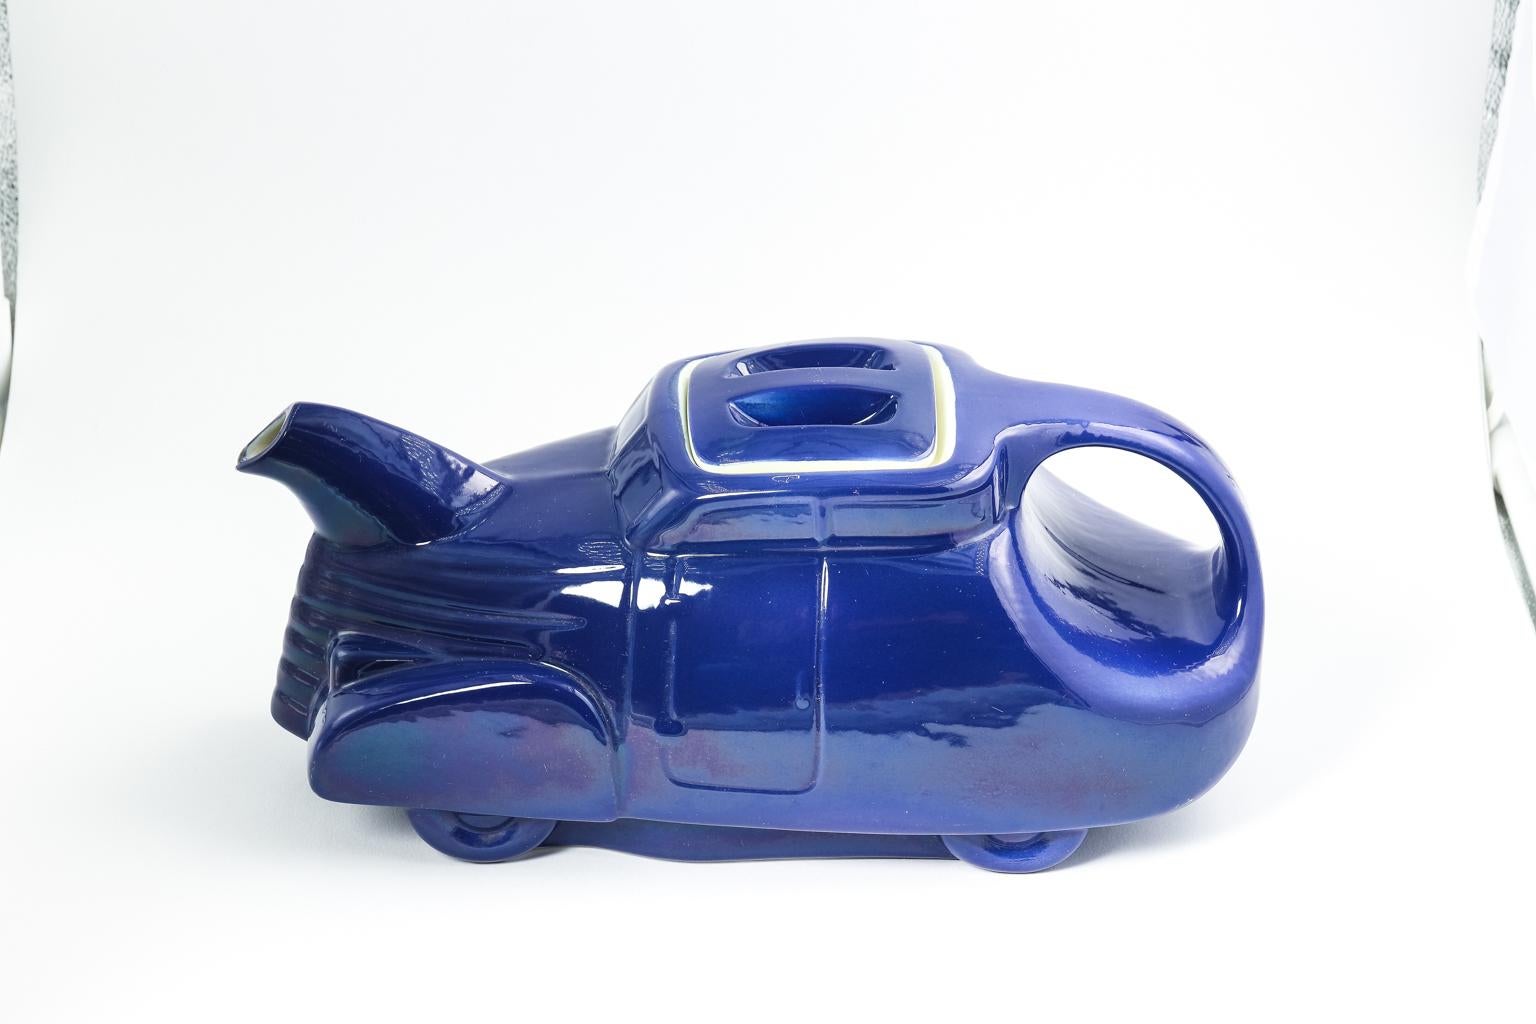 Automobile Teapot in Royal Blue by Hall, circa 1930s For Sale 2